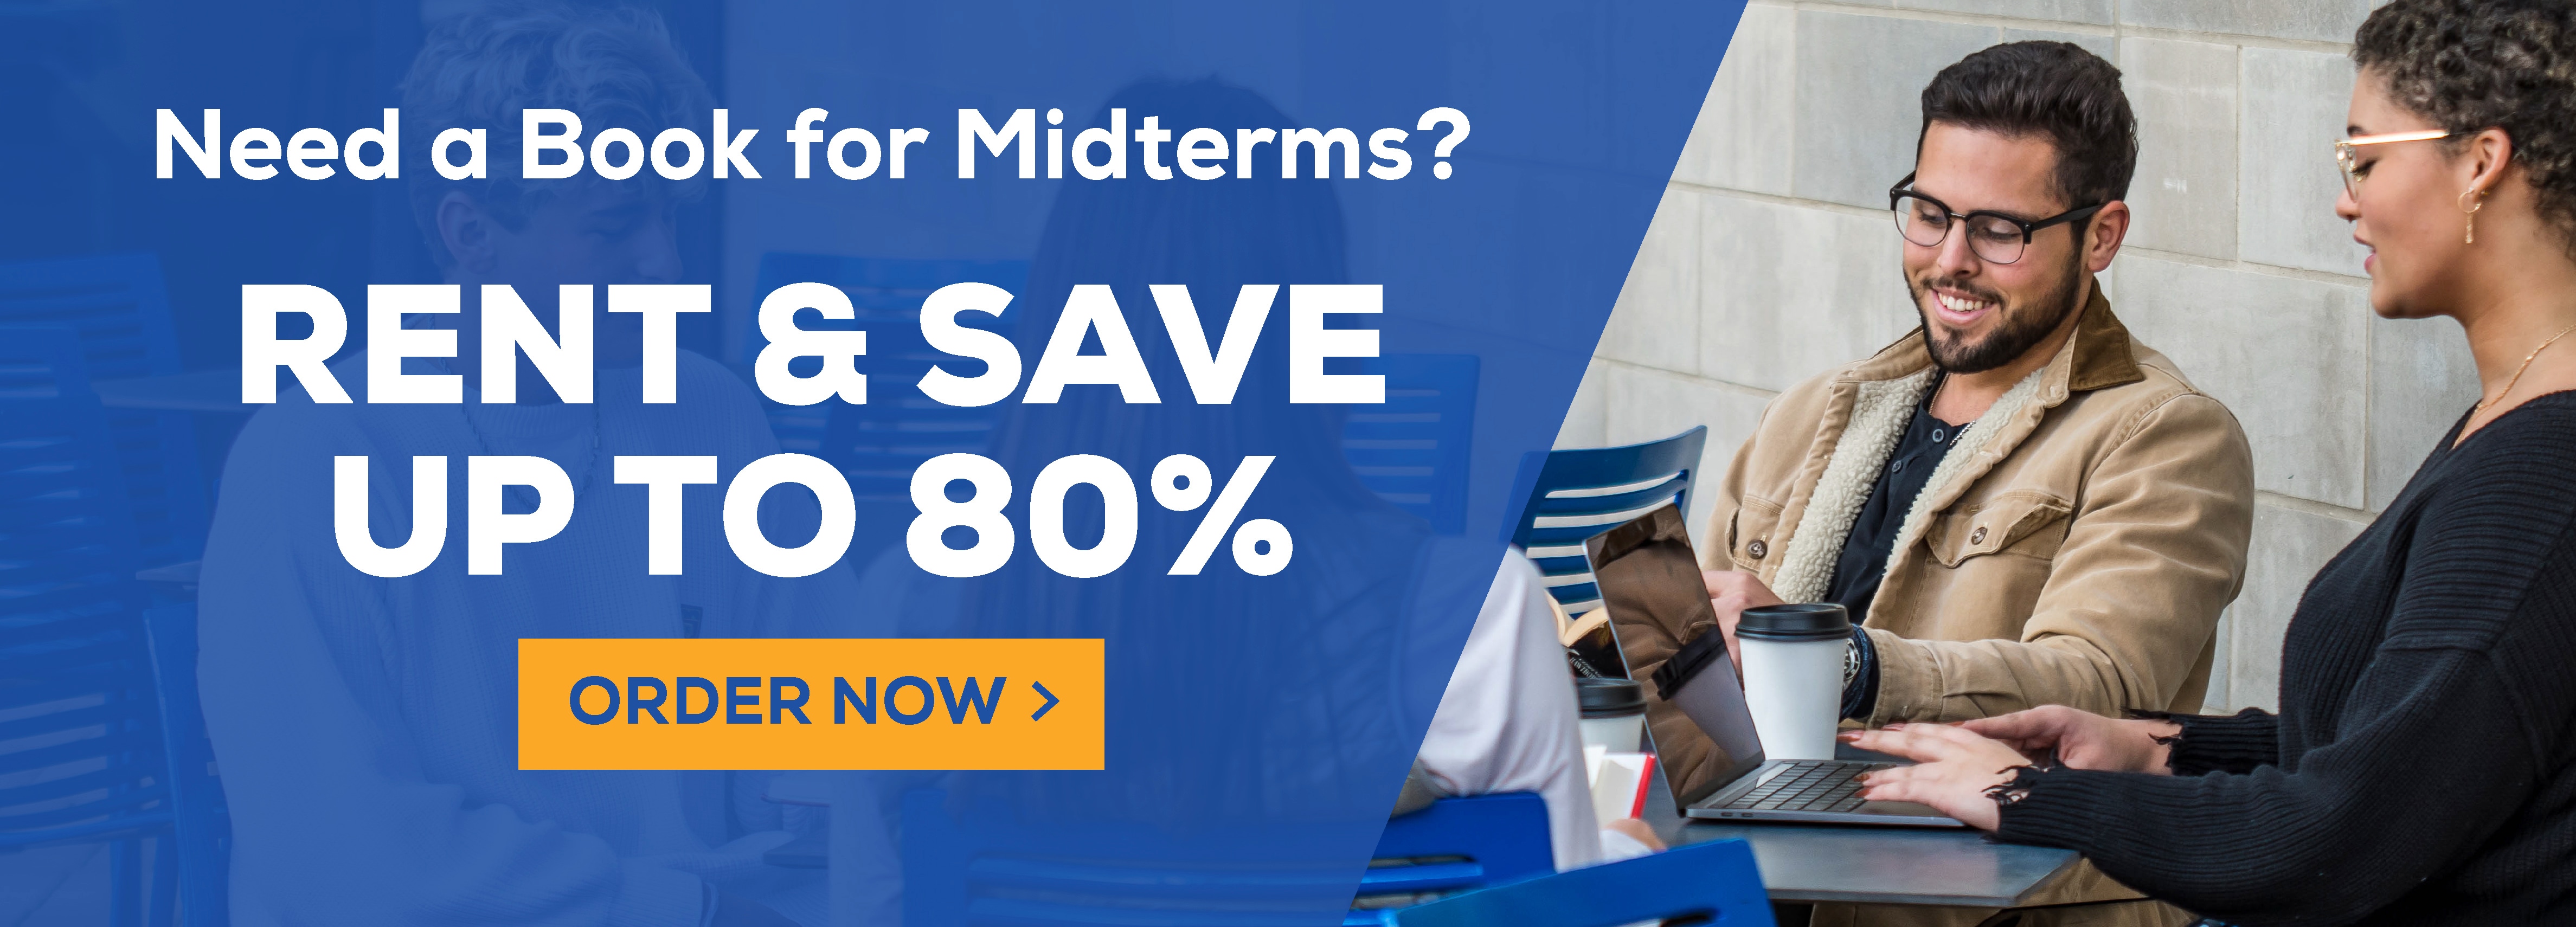 Need a Book for Midterms? Rent & Save up to 80% Order Now>